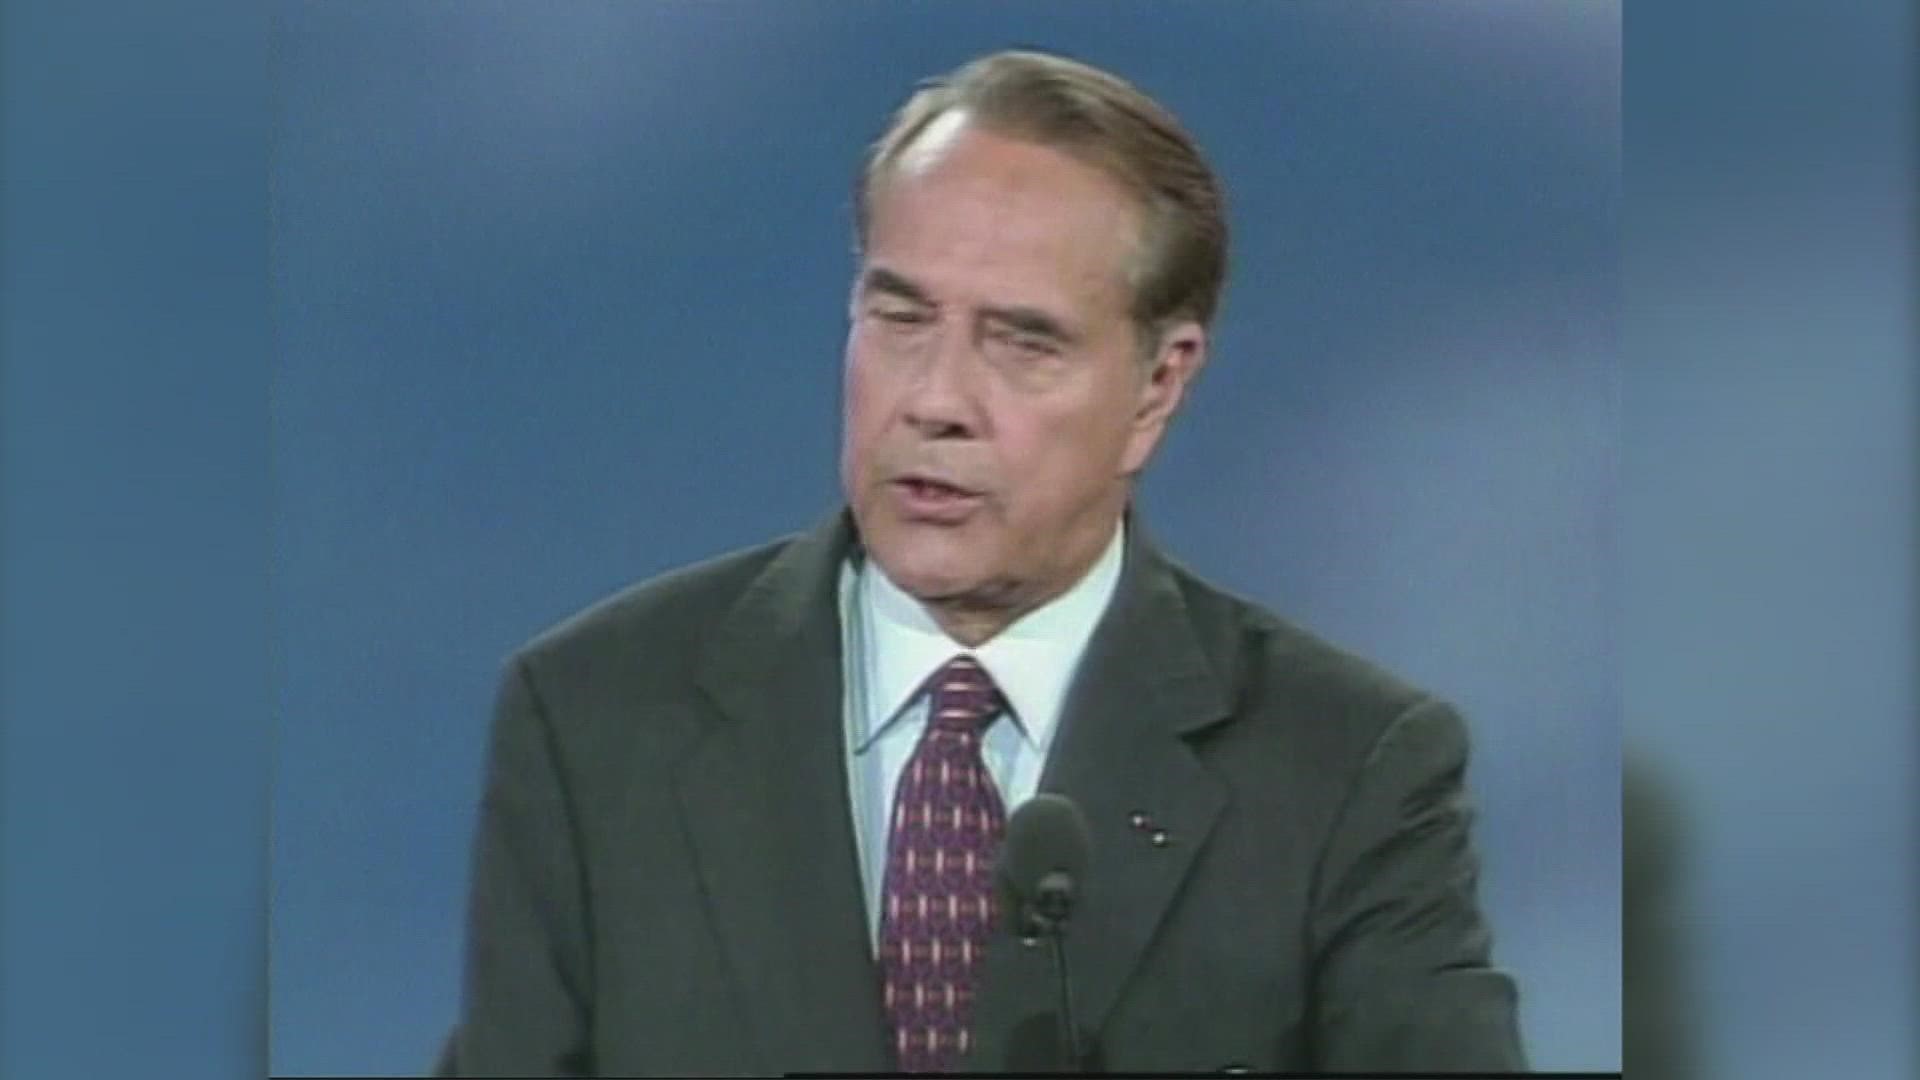 During his 36-year career on Capitol Hill, Dole became one of the most influential legislators and party leaders in the Senate.